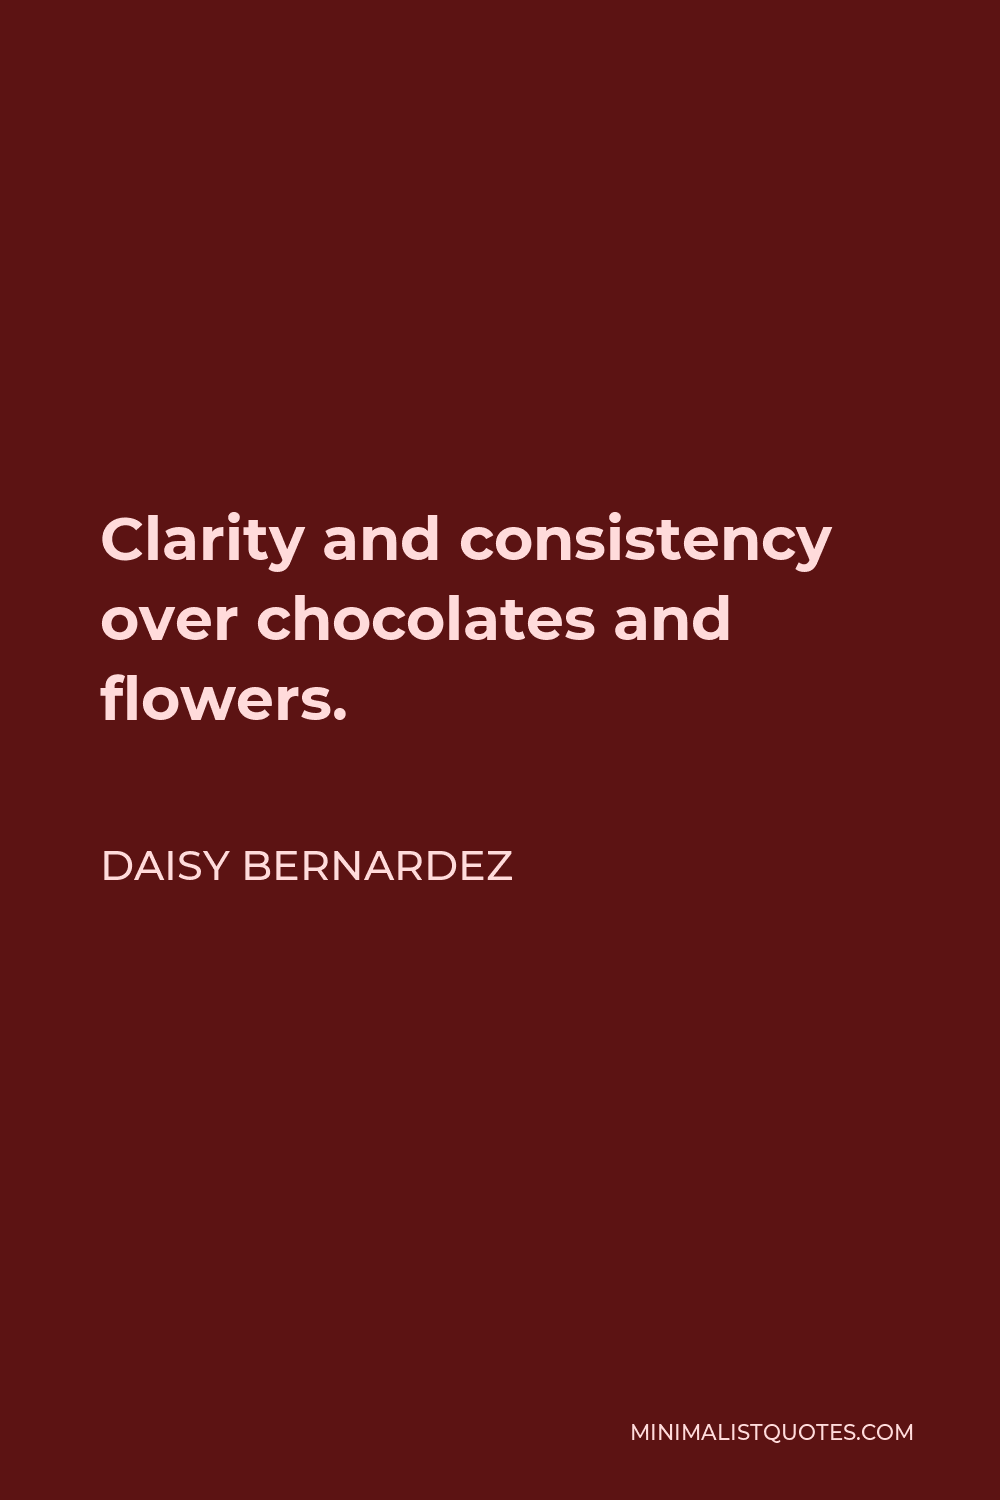 Daisy Bernardez Quote - Clarity and consistency over chocolates and flowers.